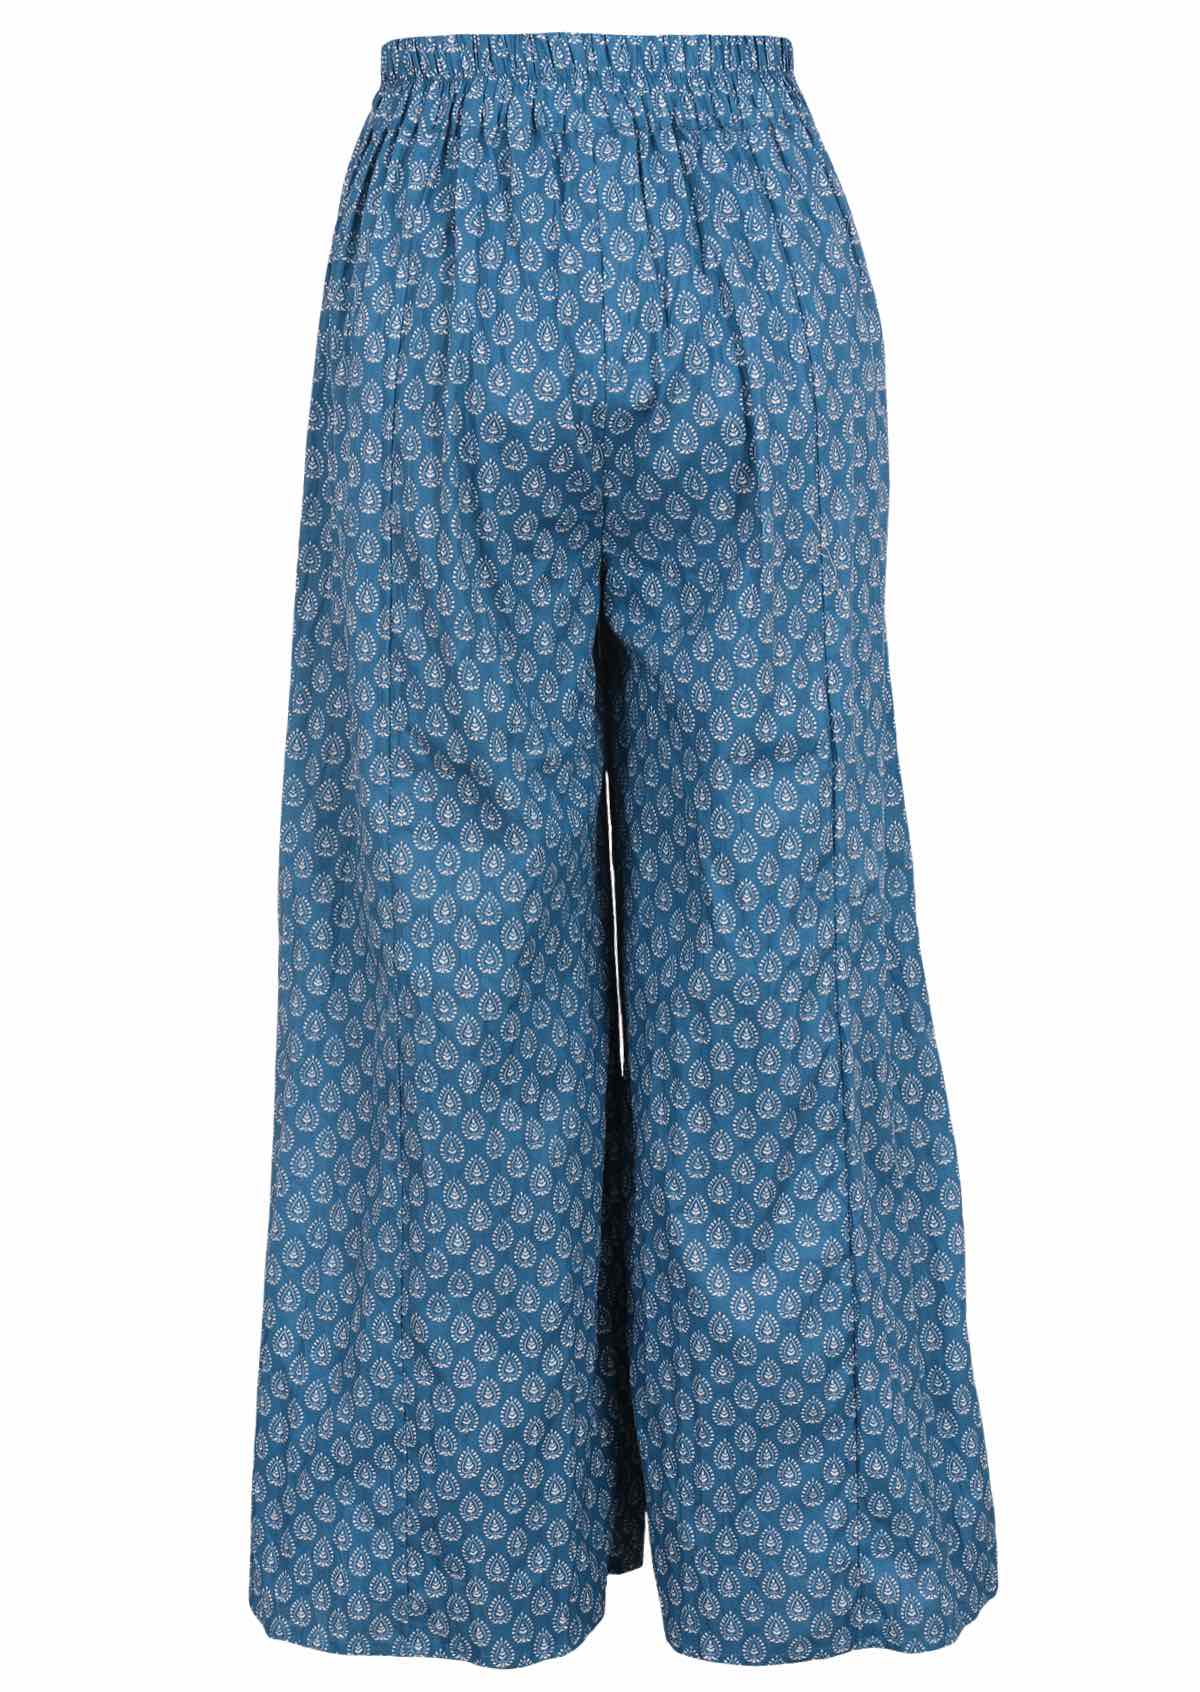 Cotton wide leg pants with fine white print on blue